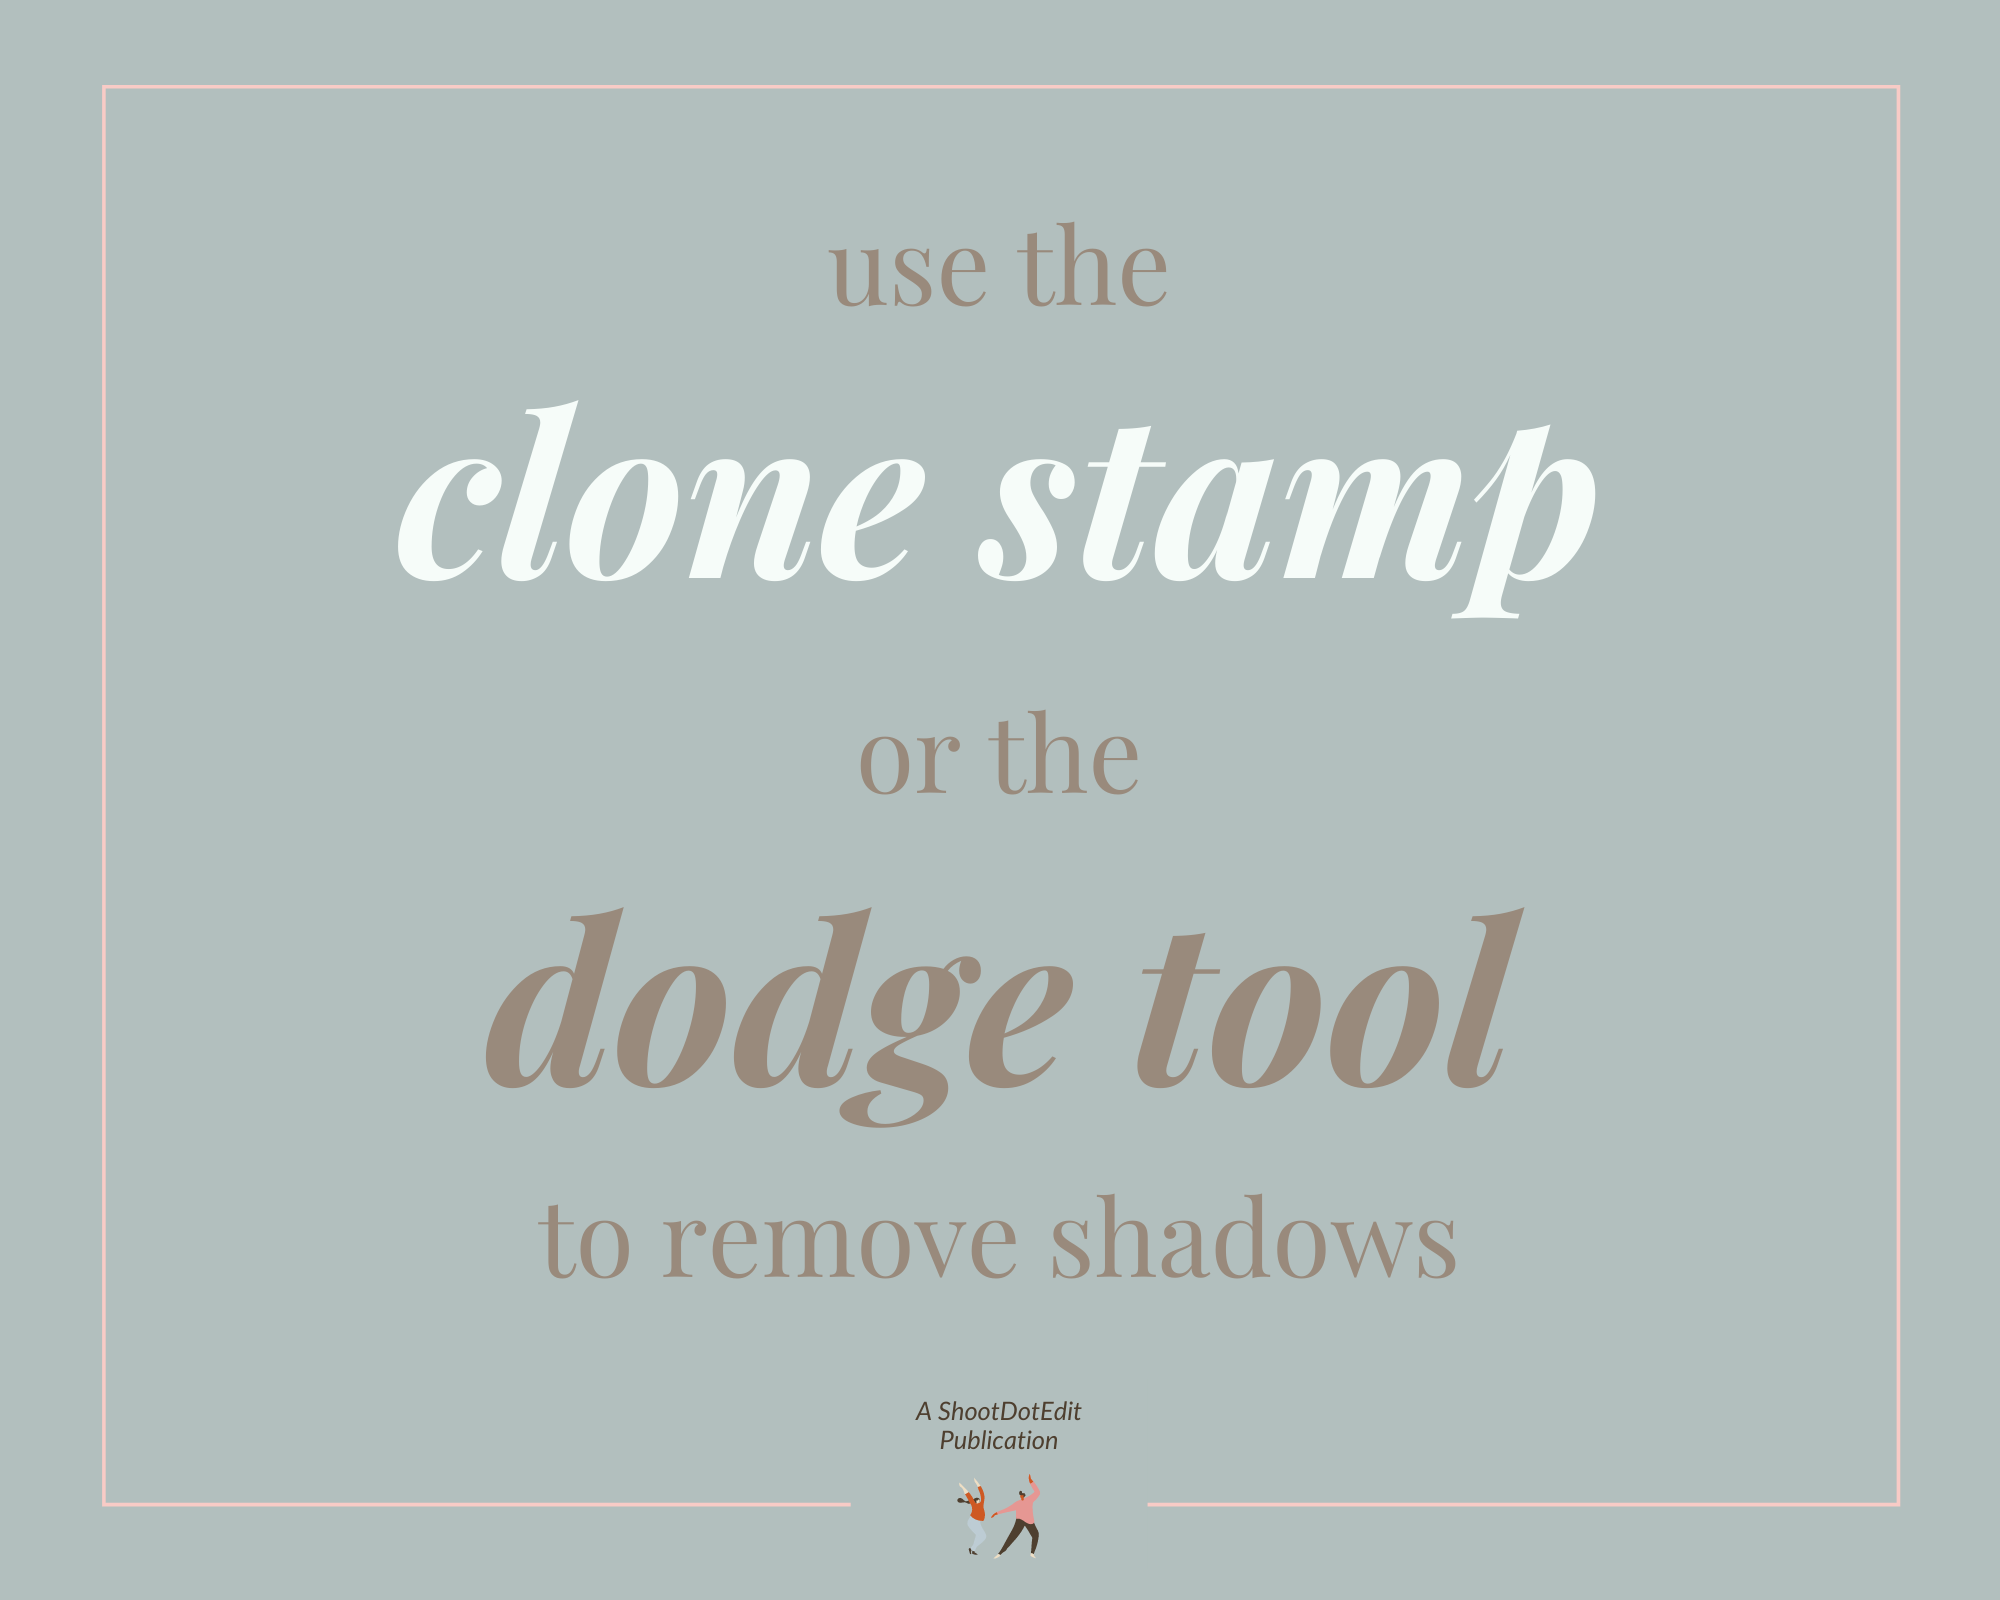 Infographic stating use the close stamp or the dodge tool to remove shadows